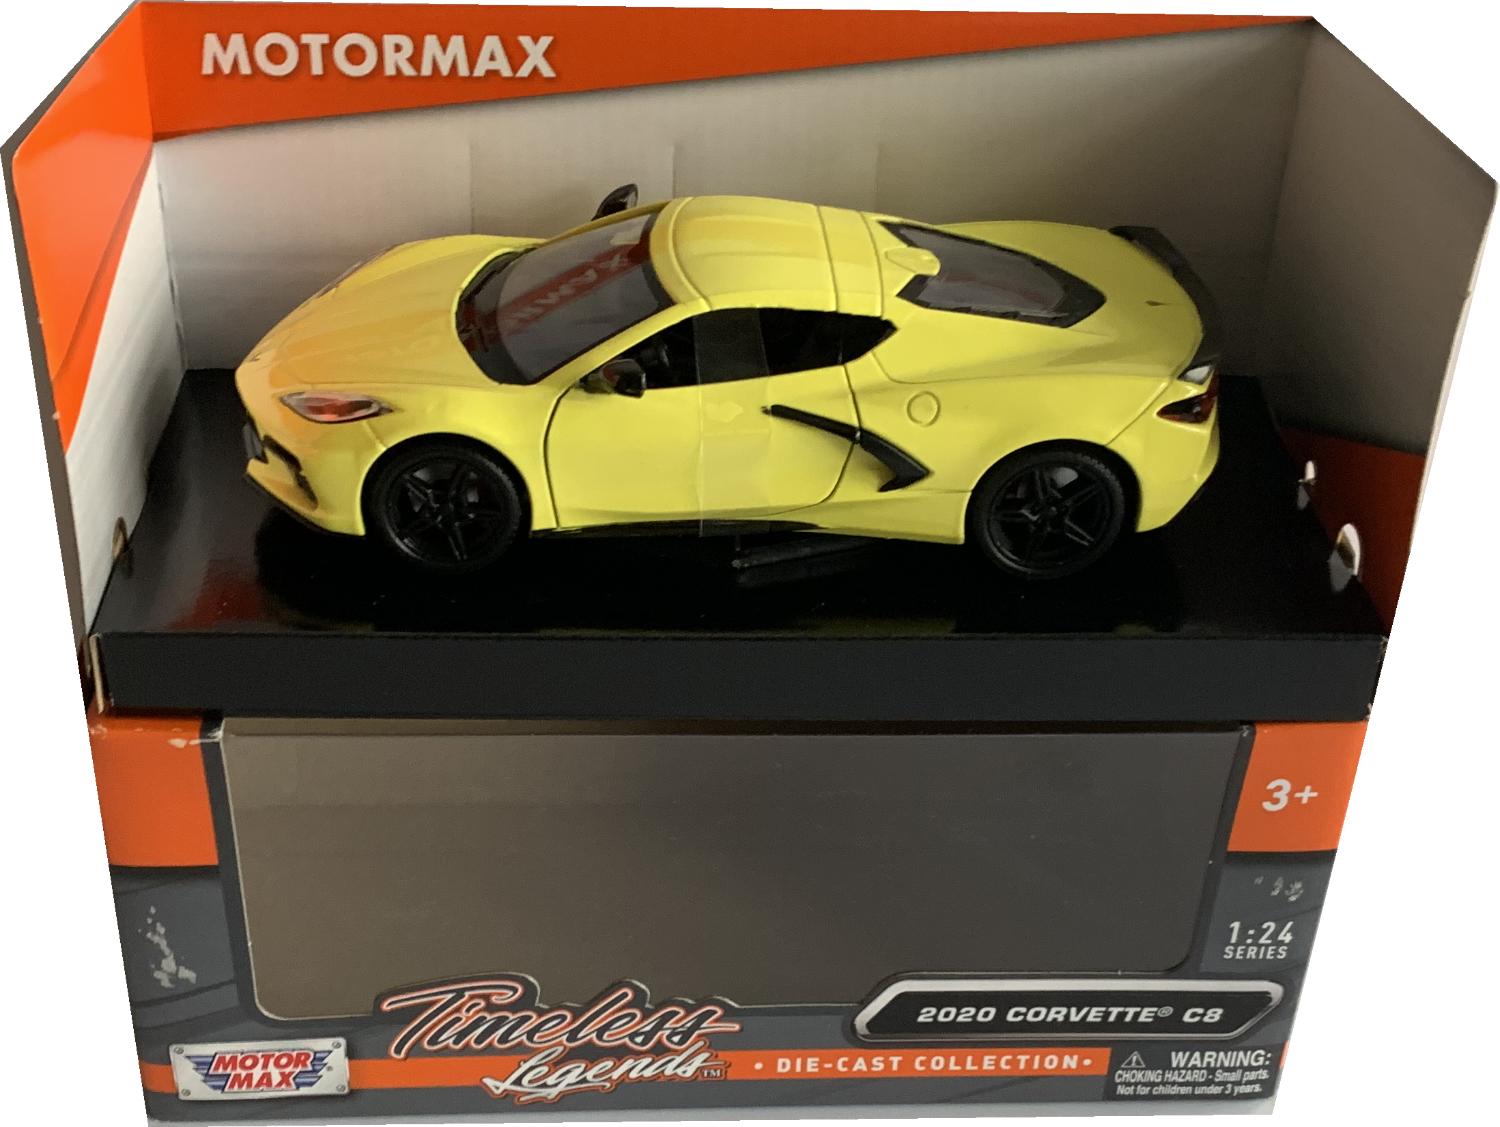 A good reproduction of the Chevrolet Corvette C8 with detail throughout, all authentically recreated.  The model is presented in a window display box, the car is approx. 19 cm long and the presentation box is 24.5 cm